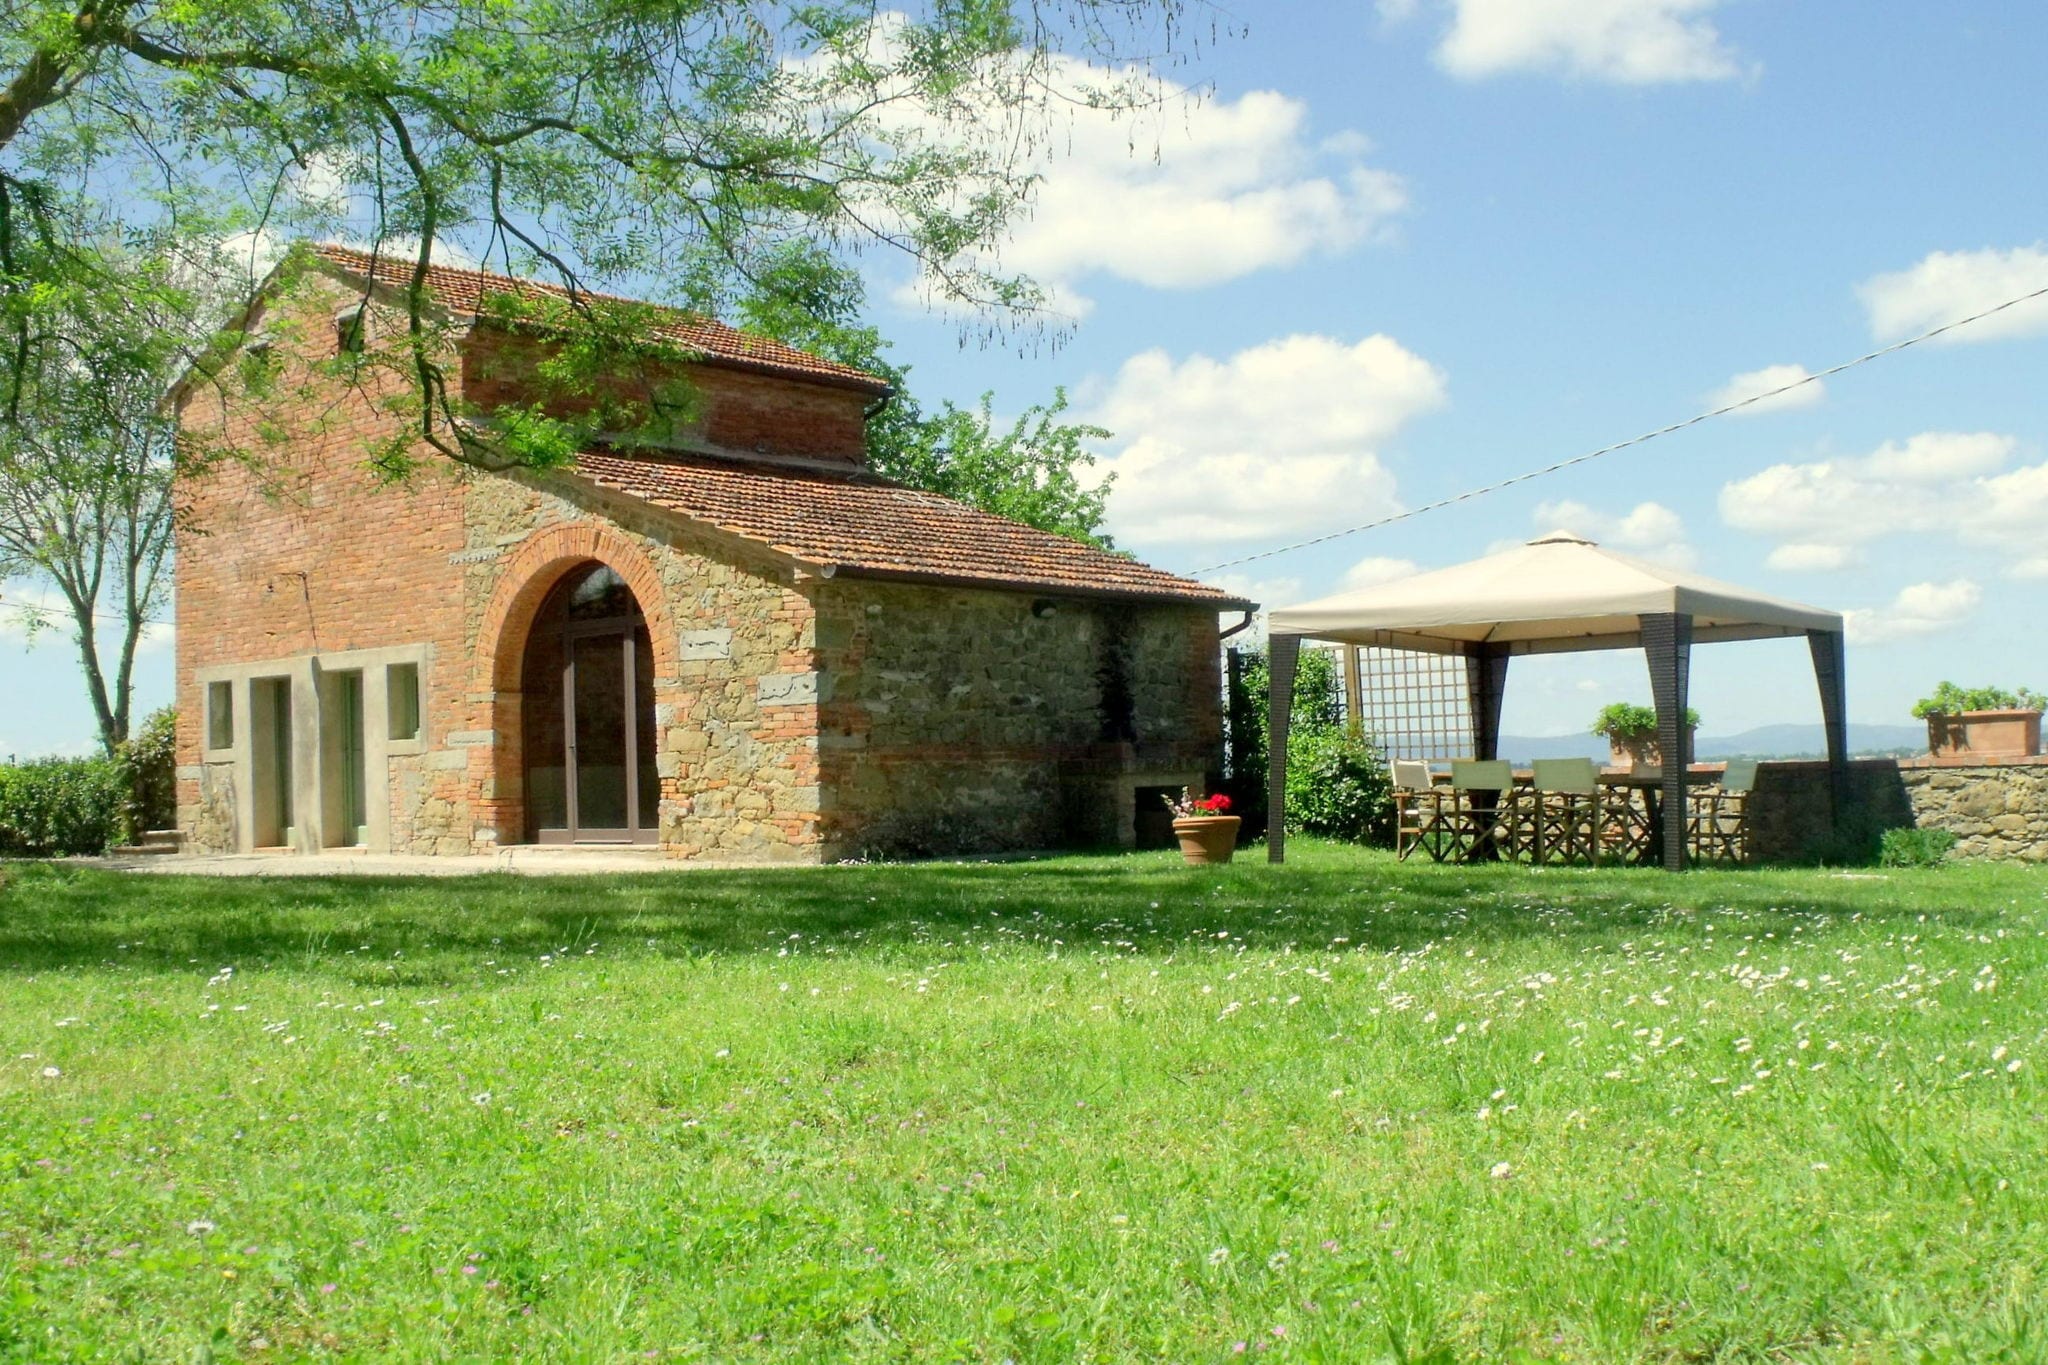 Characteristic cottage in the Tuscan hills